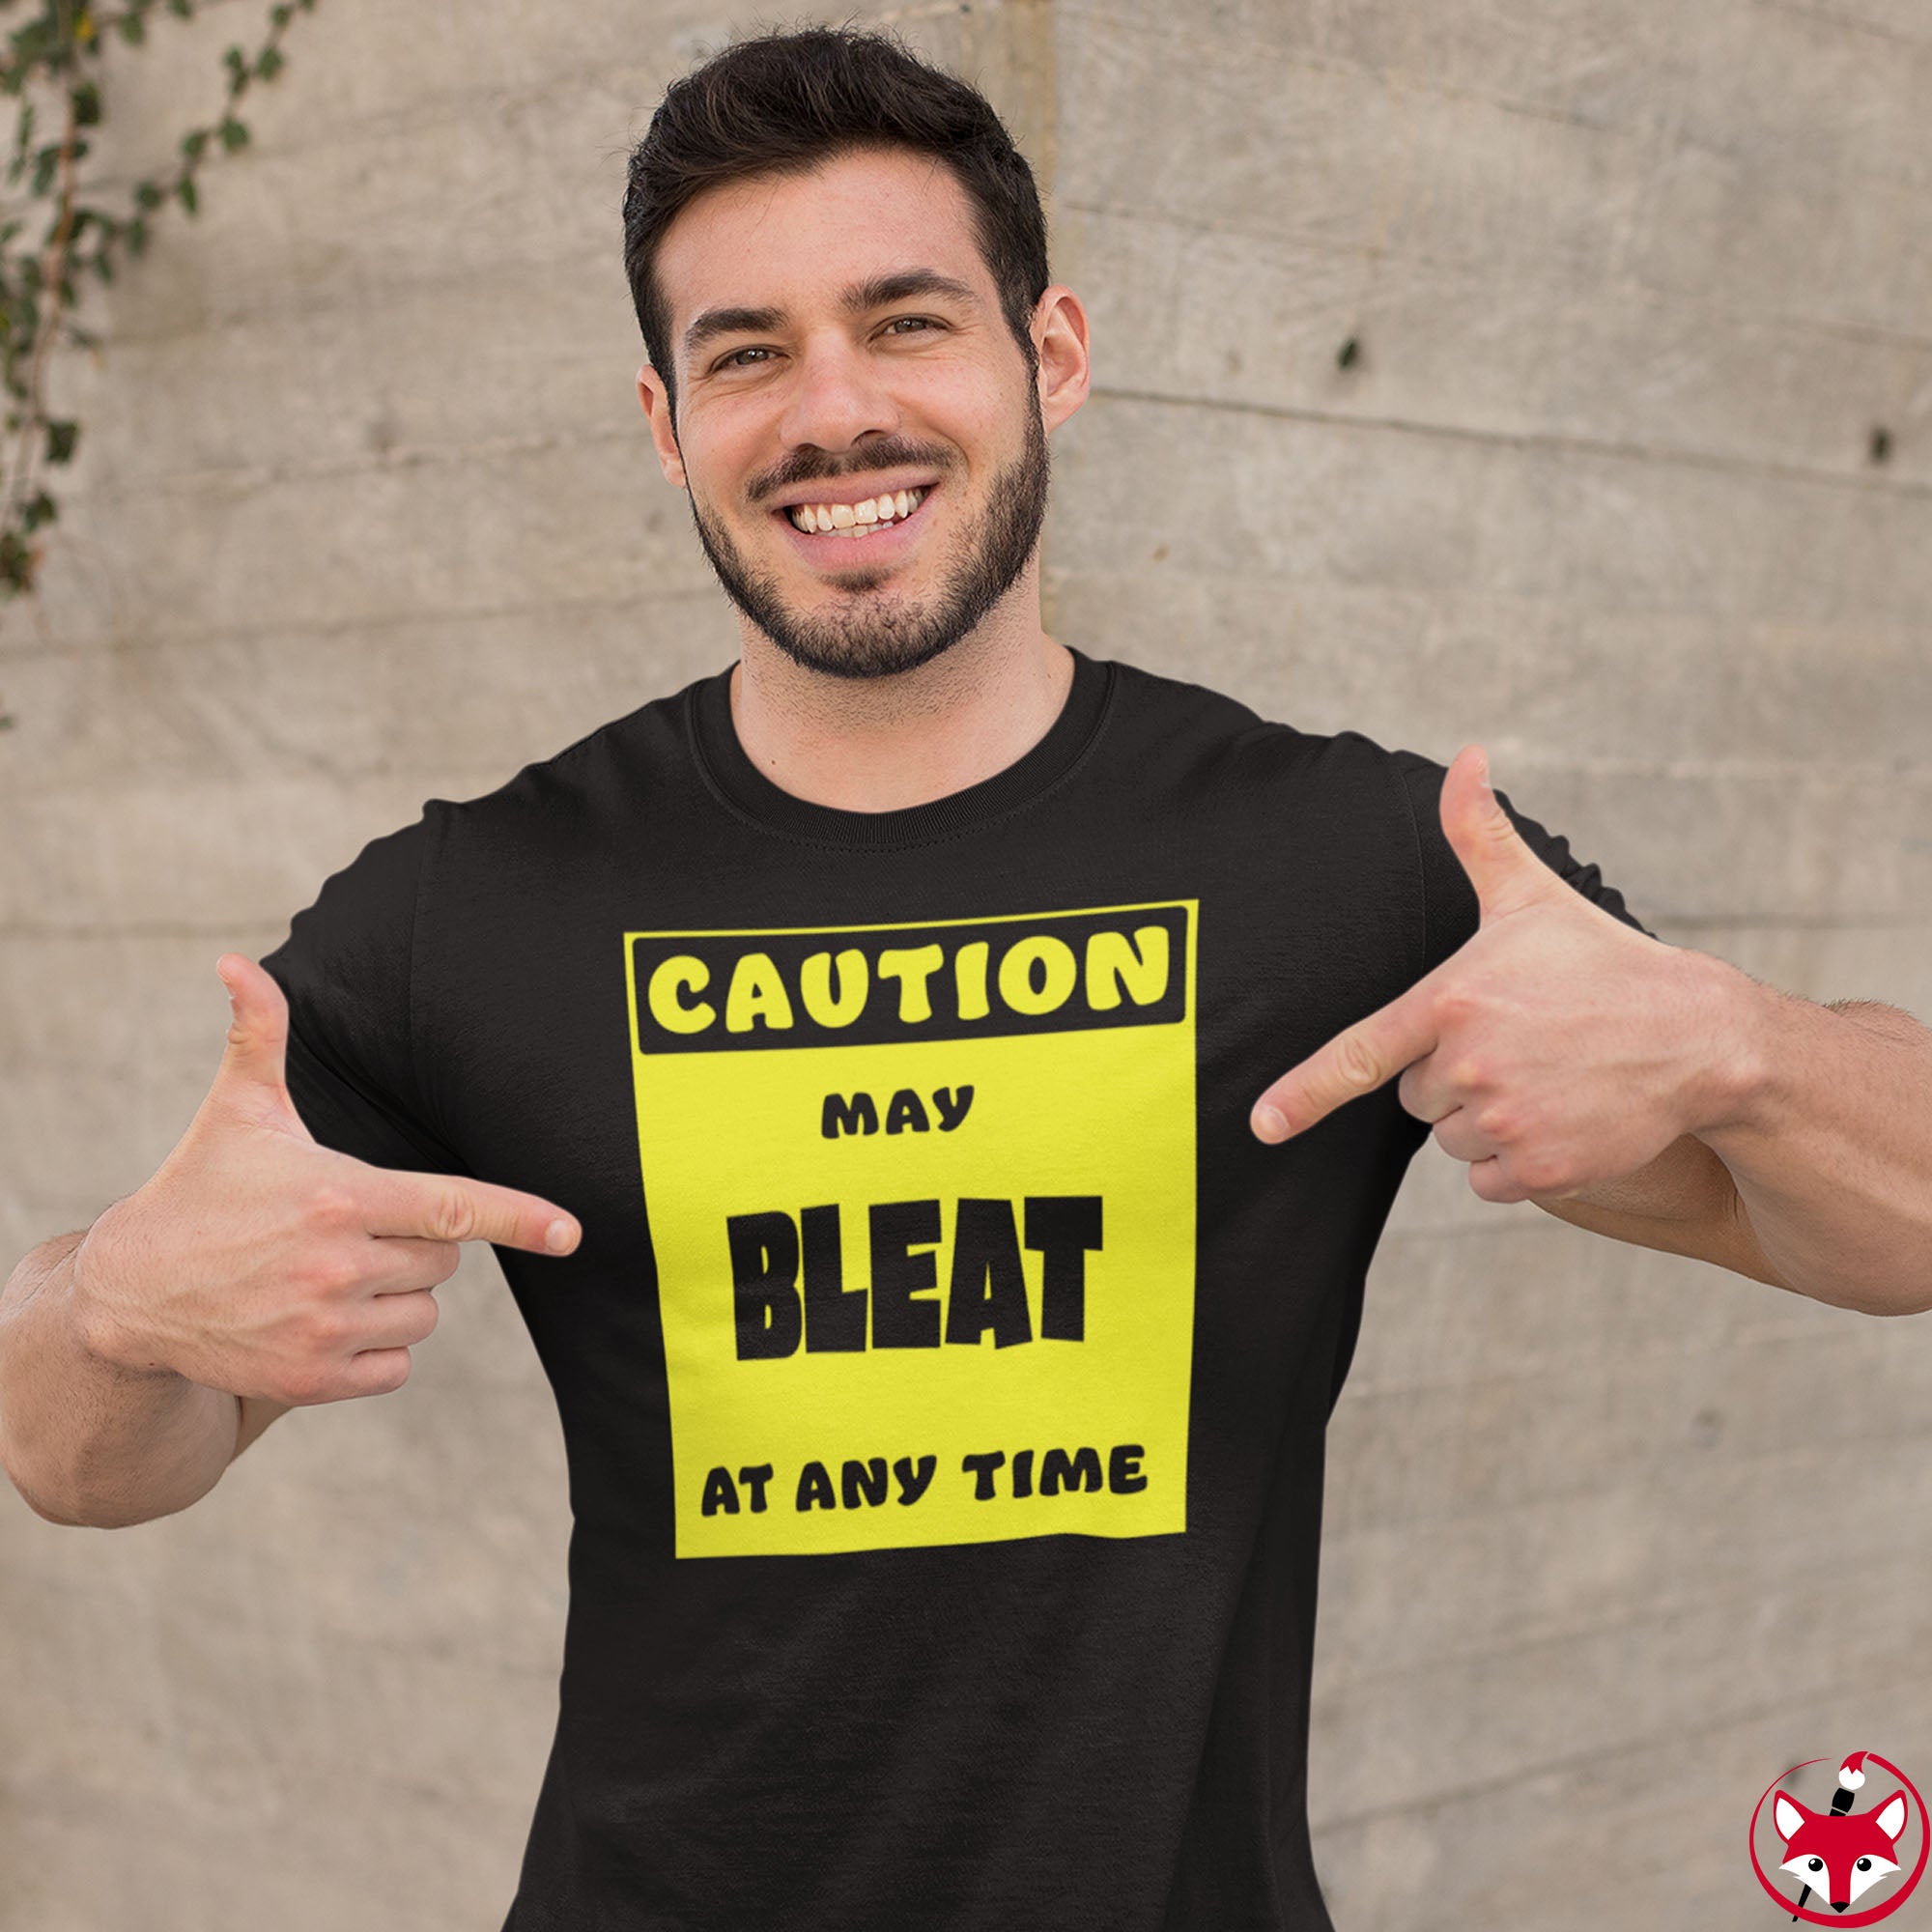 CAUTION! May BLEAT at any time! - T-Shirt T-Shirt AFLT-Whootorca 